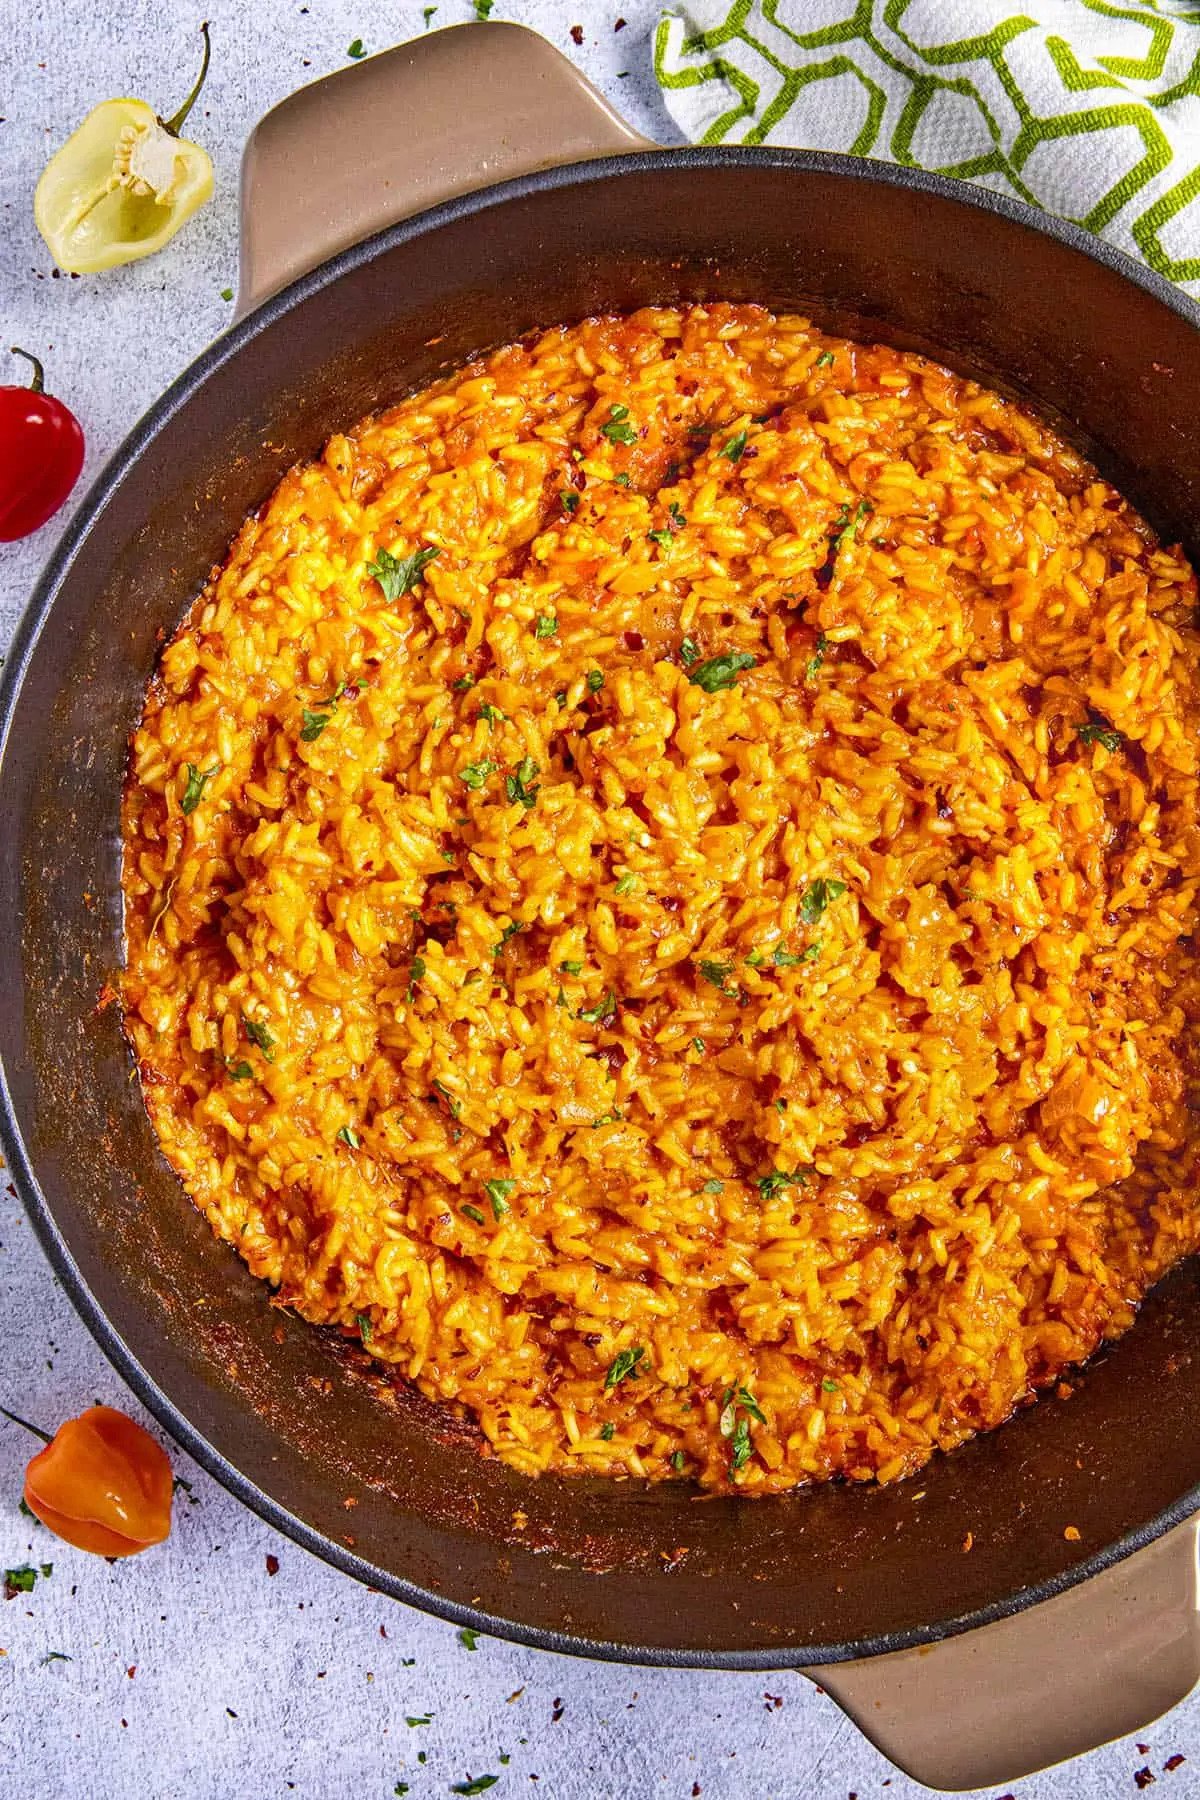 You are currently viewing West African Spicy Jollof Rice Recipe